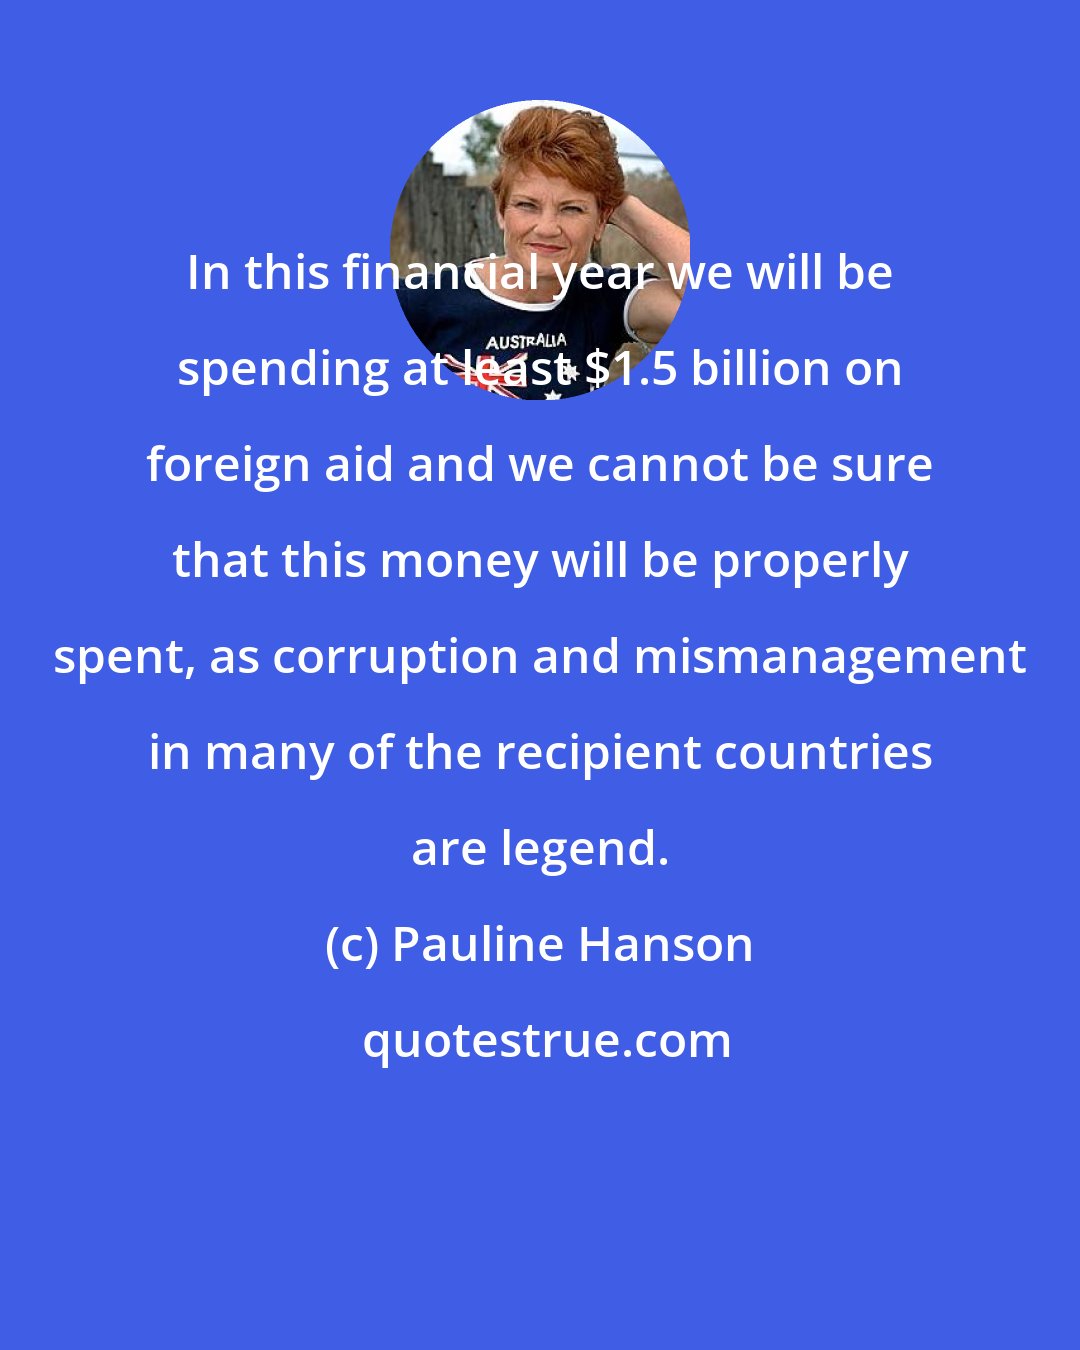 Pauline Hanson: In this financial year we will be spending at least $1.5 billion on foreign aid and we cannot be sure that this money will be properly spent, as corruption and mismanagement in many of the recipient countries are legend.